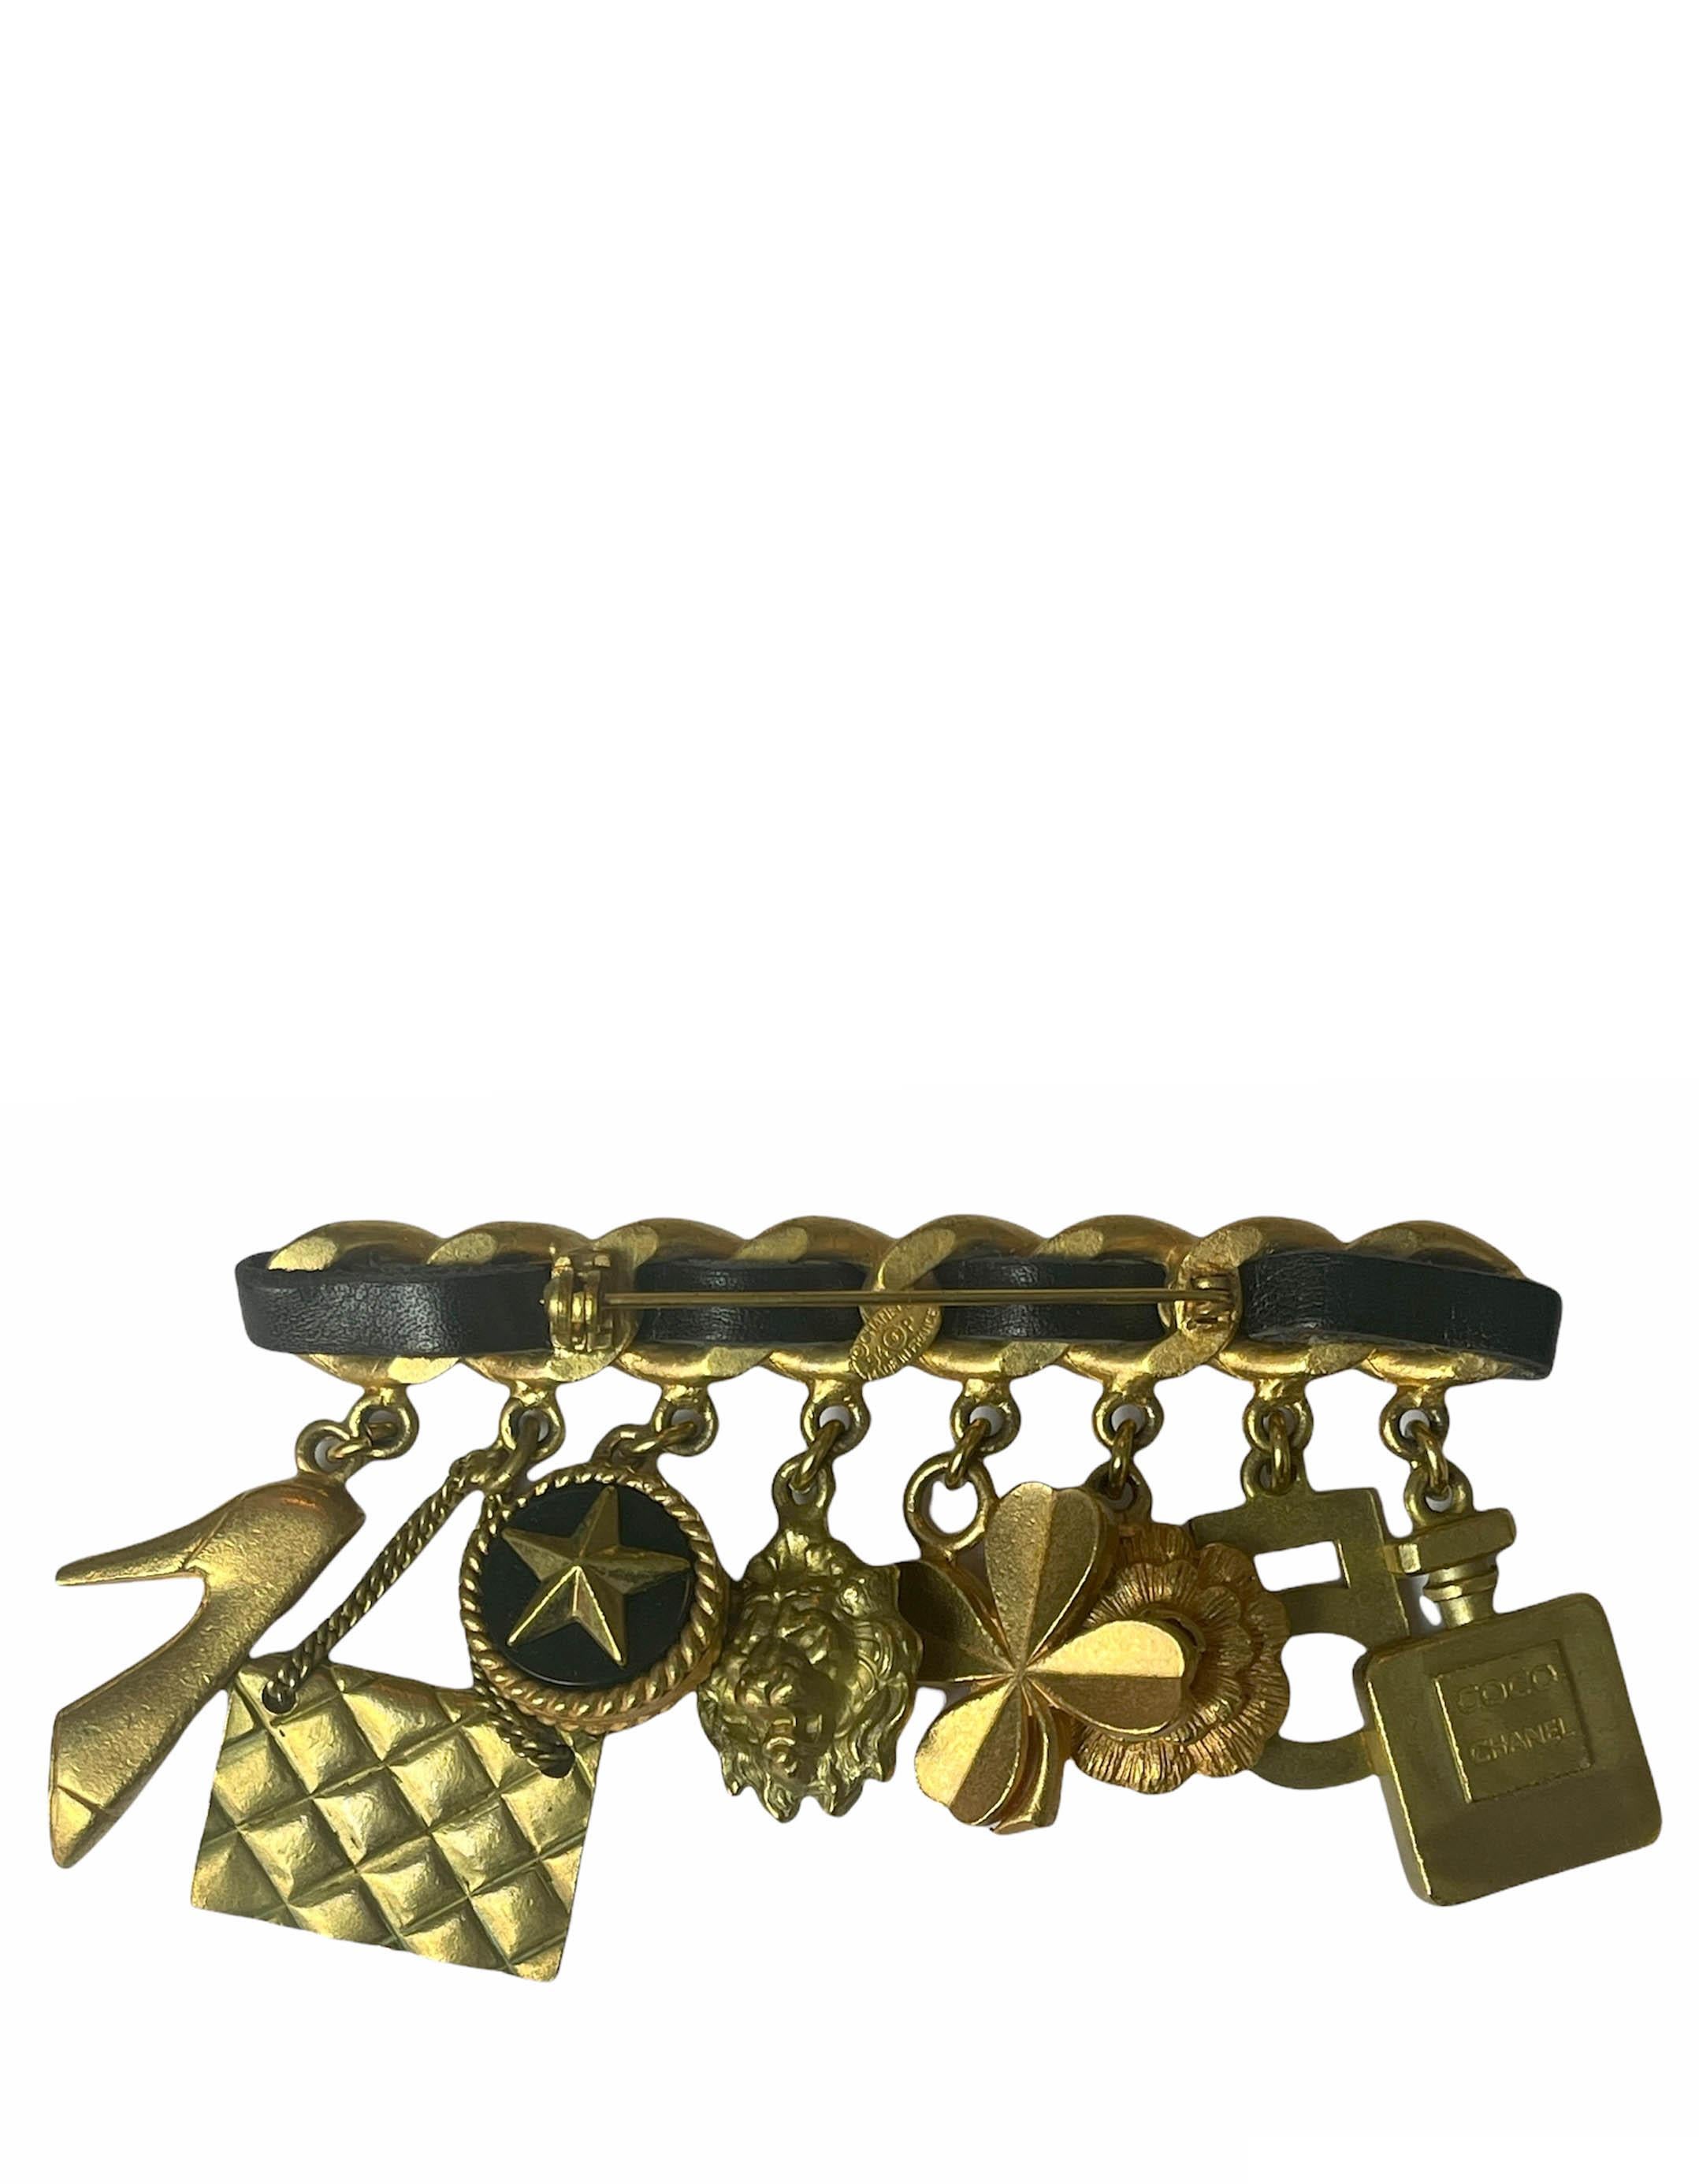 Chanel 1994 Iconic Leather Laced Charm Brooch.  Features Coco Chanel perfume bottle, shamrock, camellia, lion head, quilted bag, high heel, number five, and star charm.

Made In: France
Year of Production: 1994
Color: Goldtone and black
Materials: